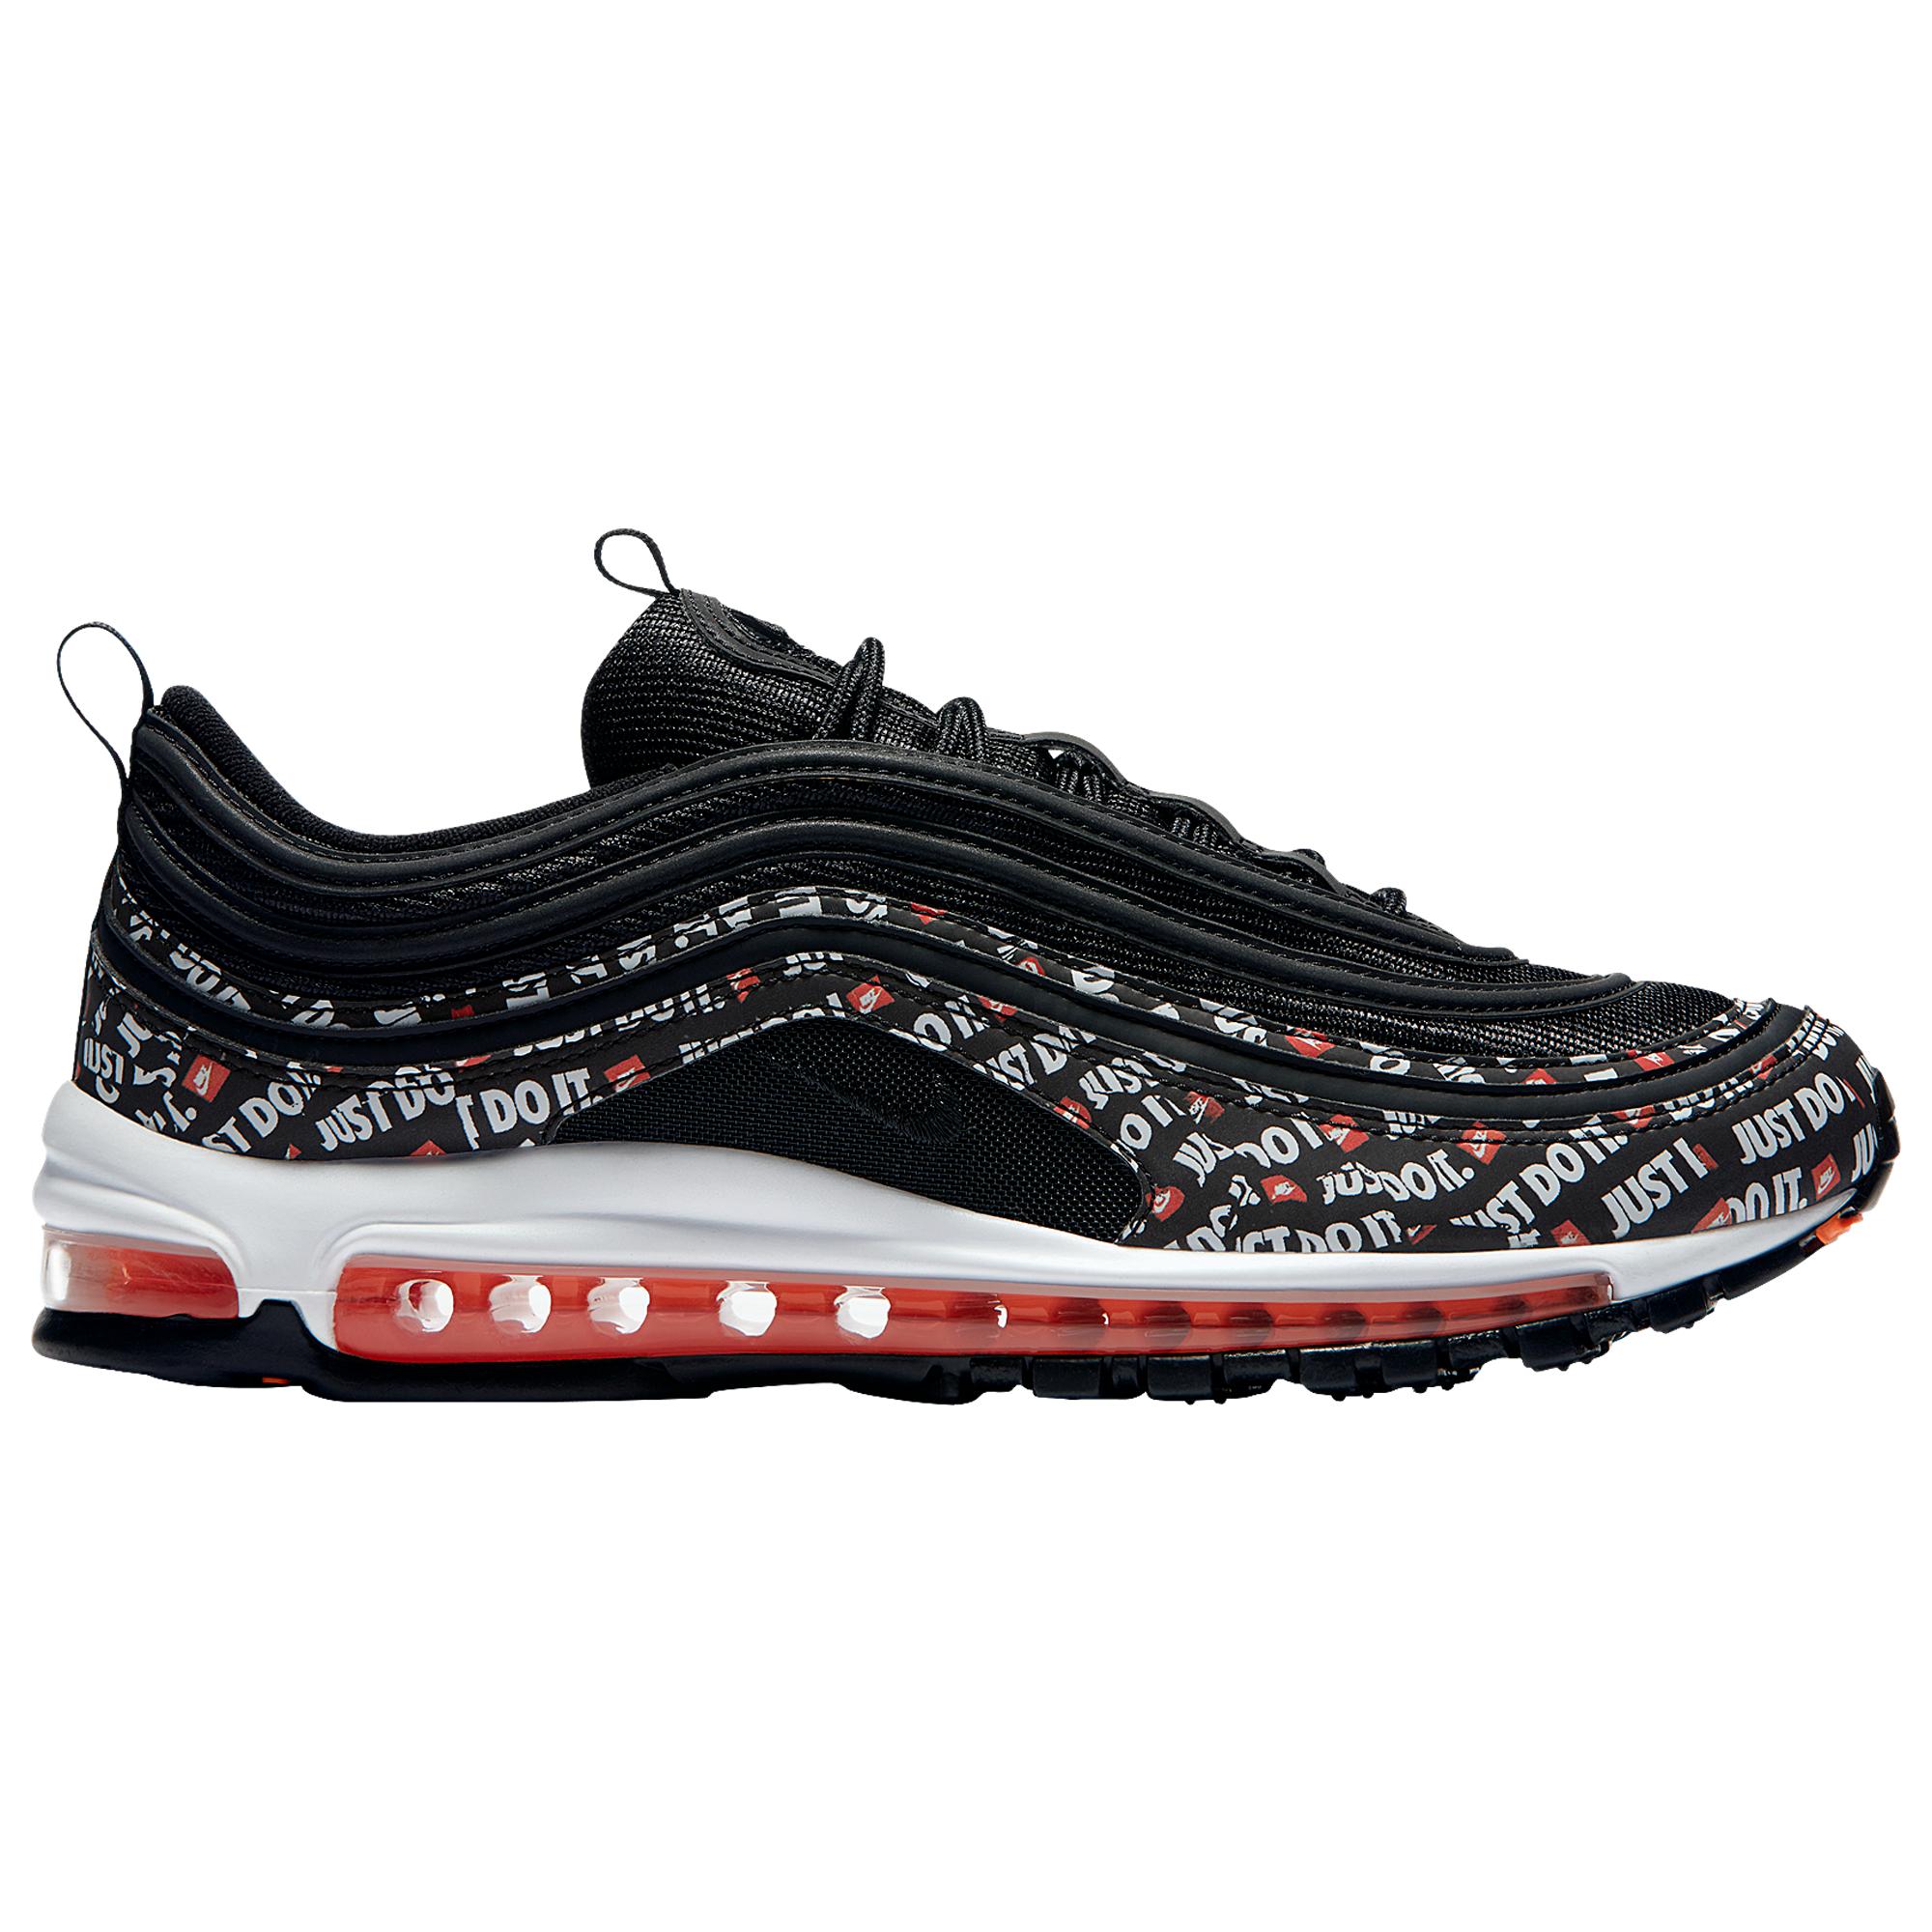 Nike Air Max 97 in Black for Men - Save 60% - Lyst